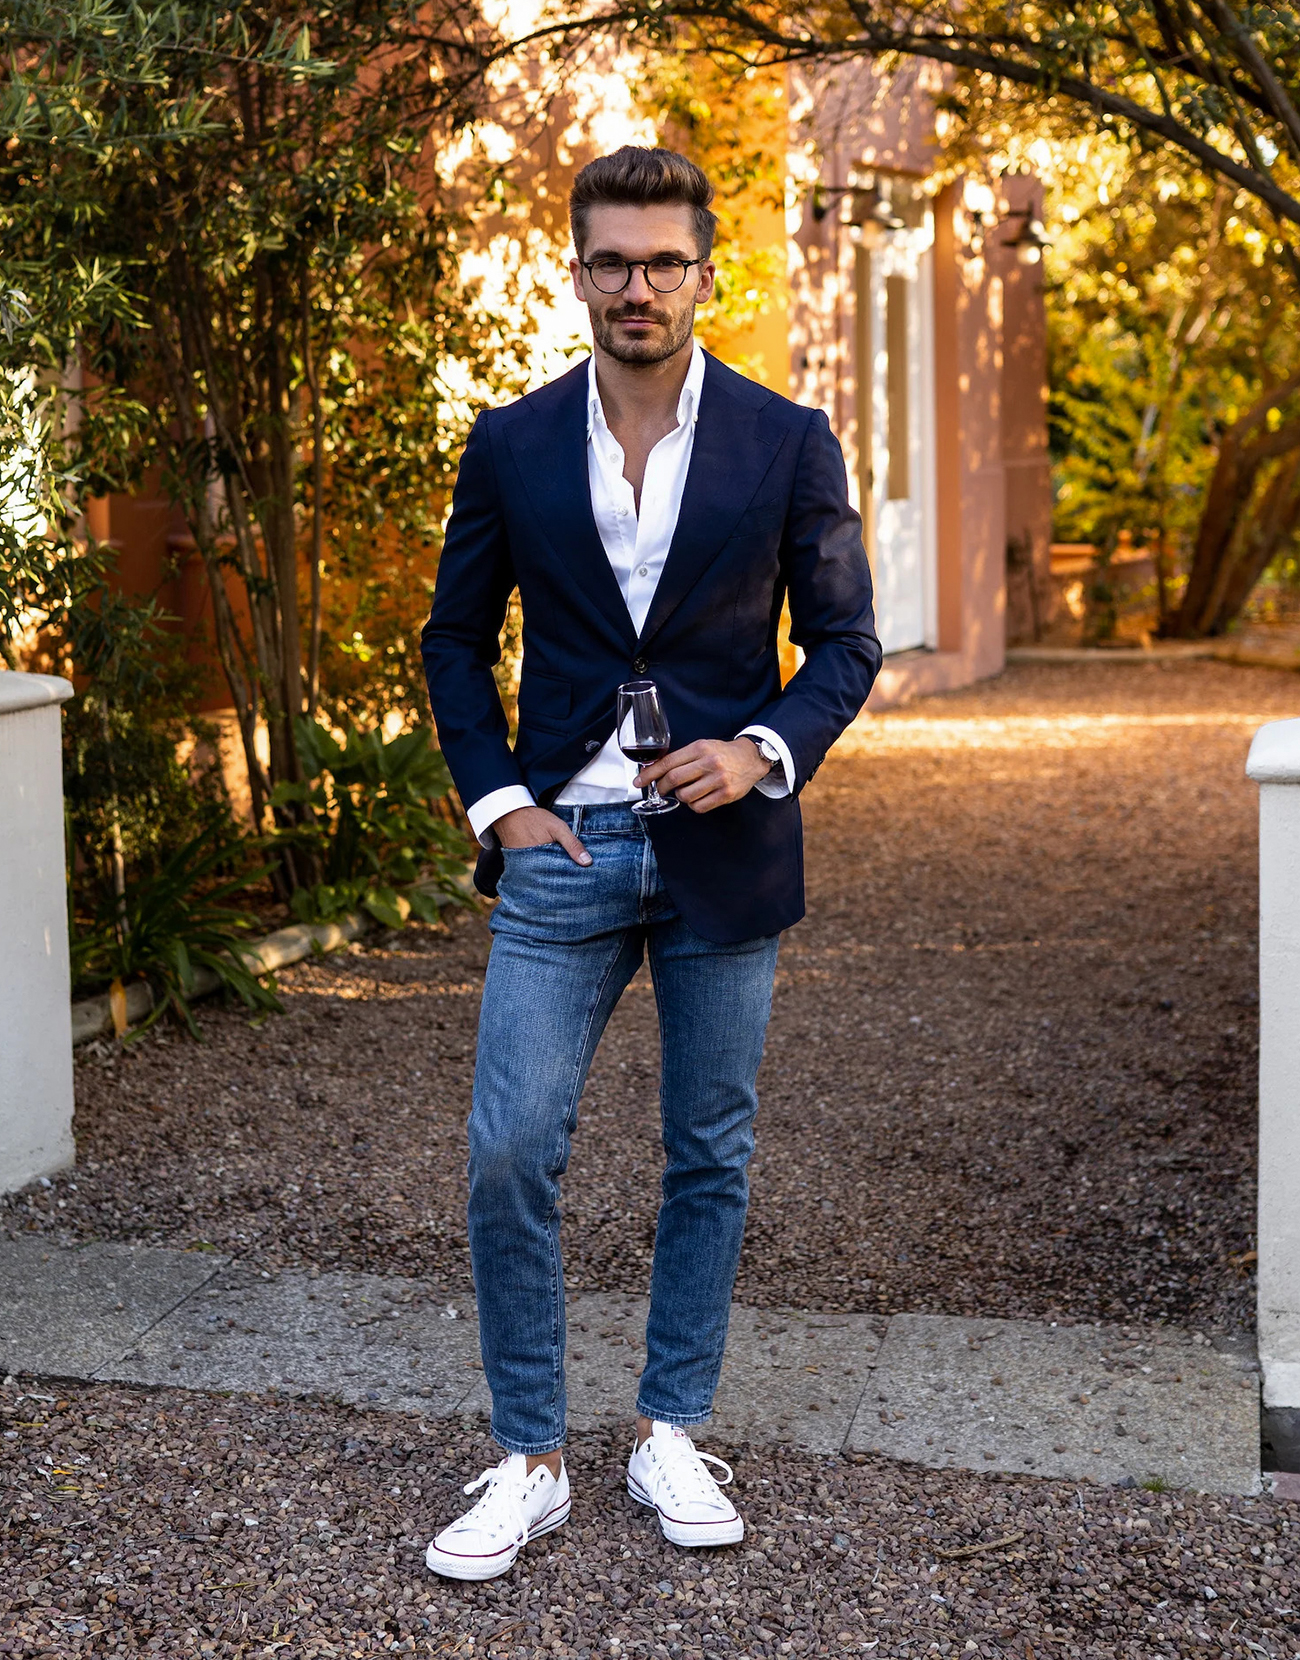 navy blazer, white shirt, blue jeans, and white sneakers